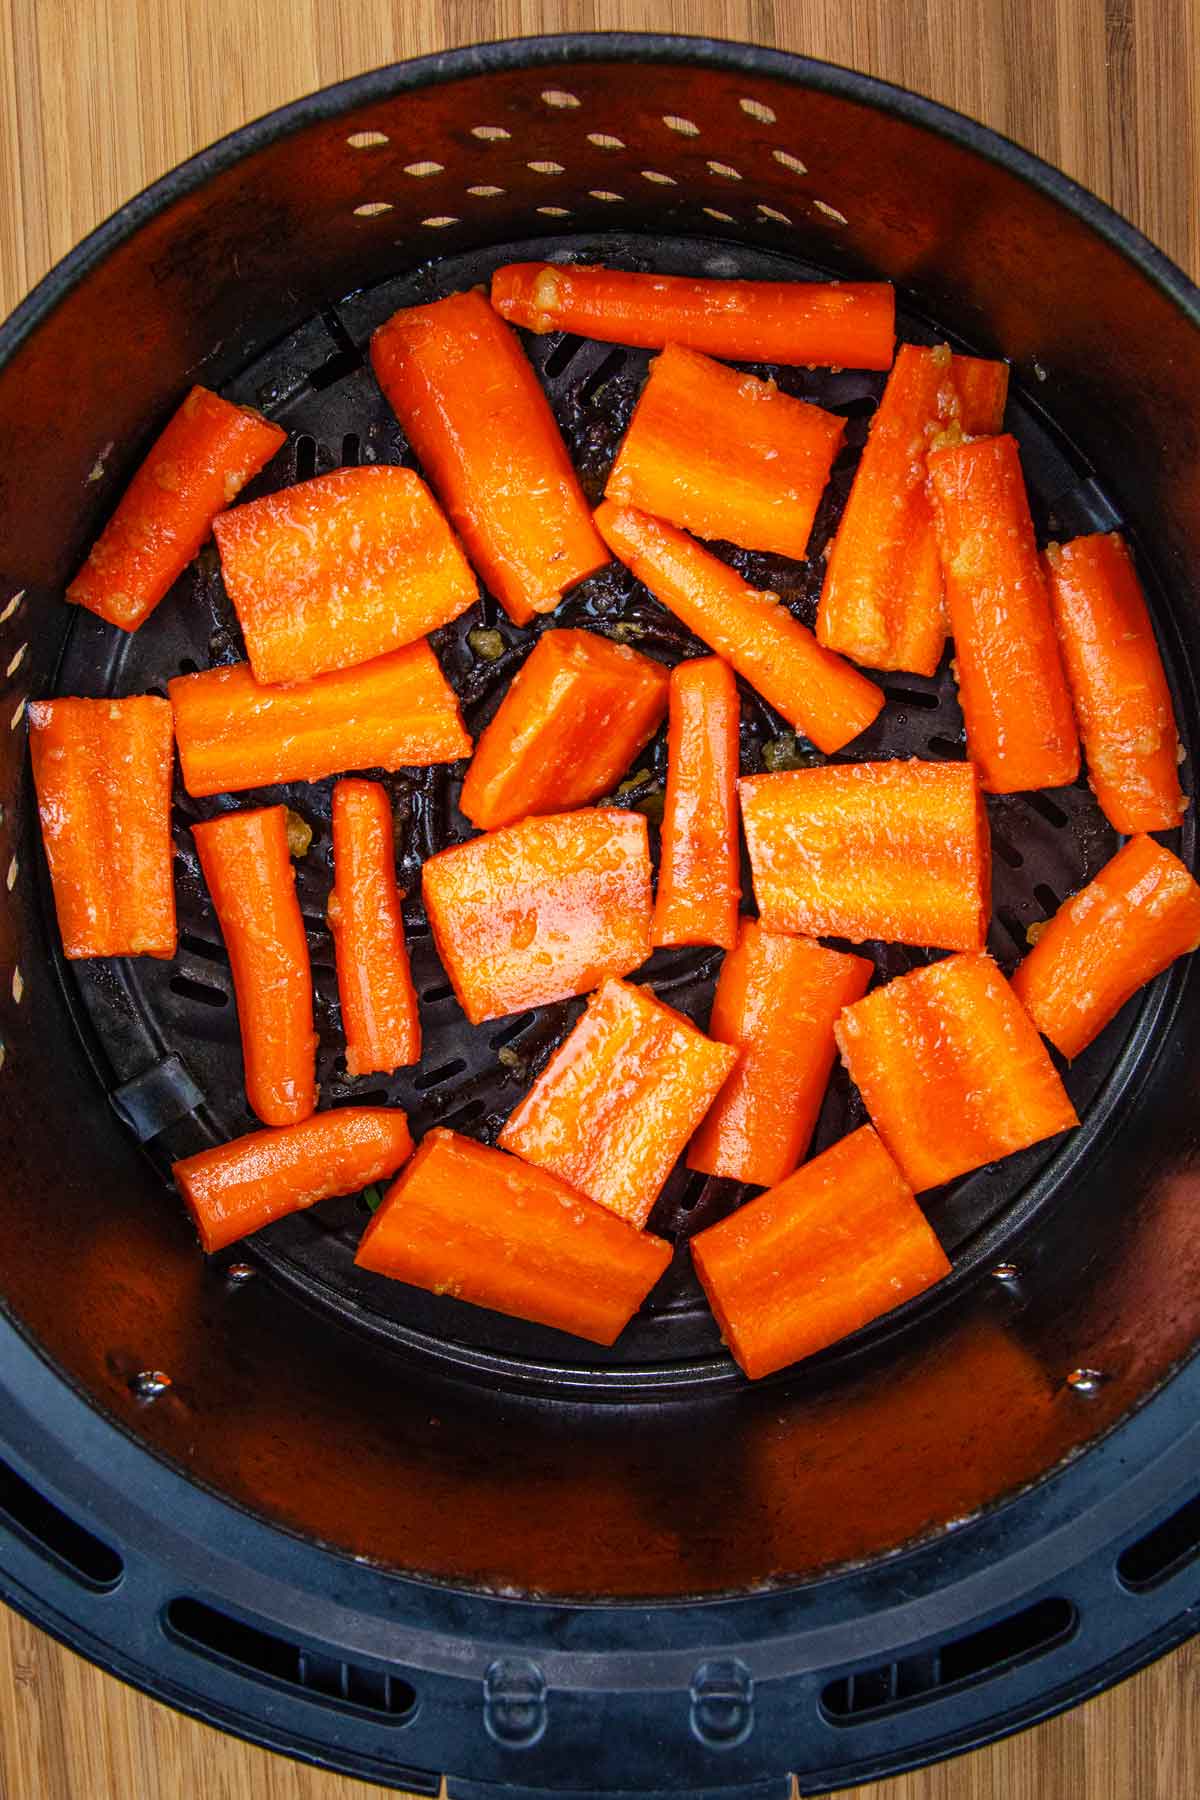 place the glazed carrots in the air fryer basket